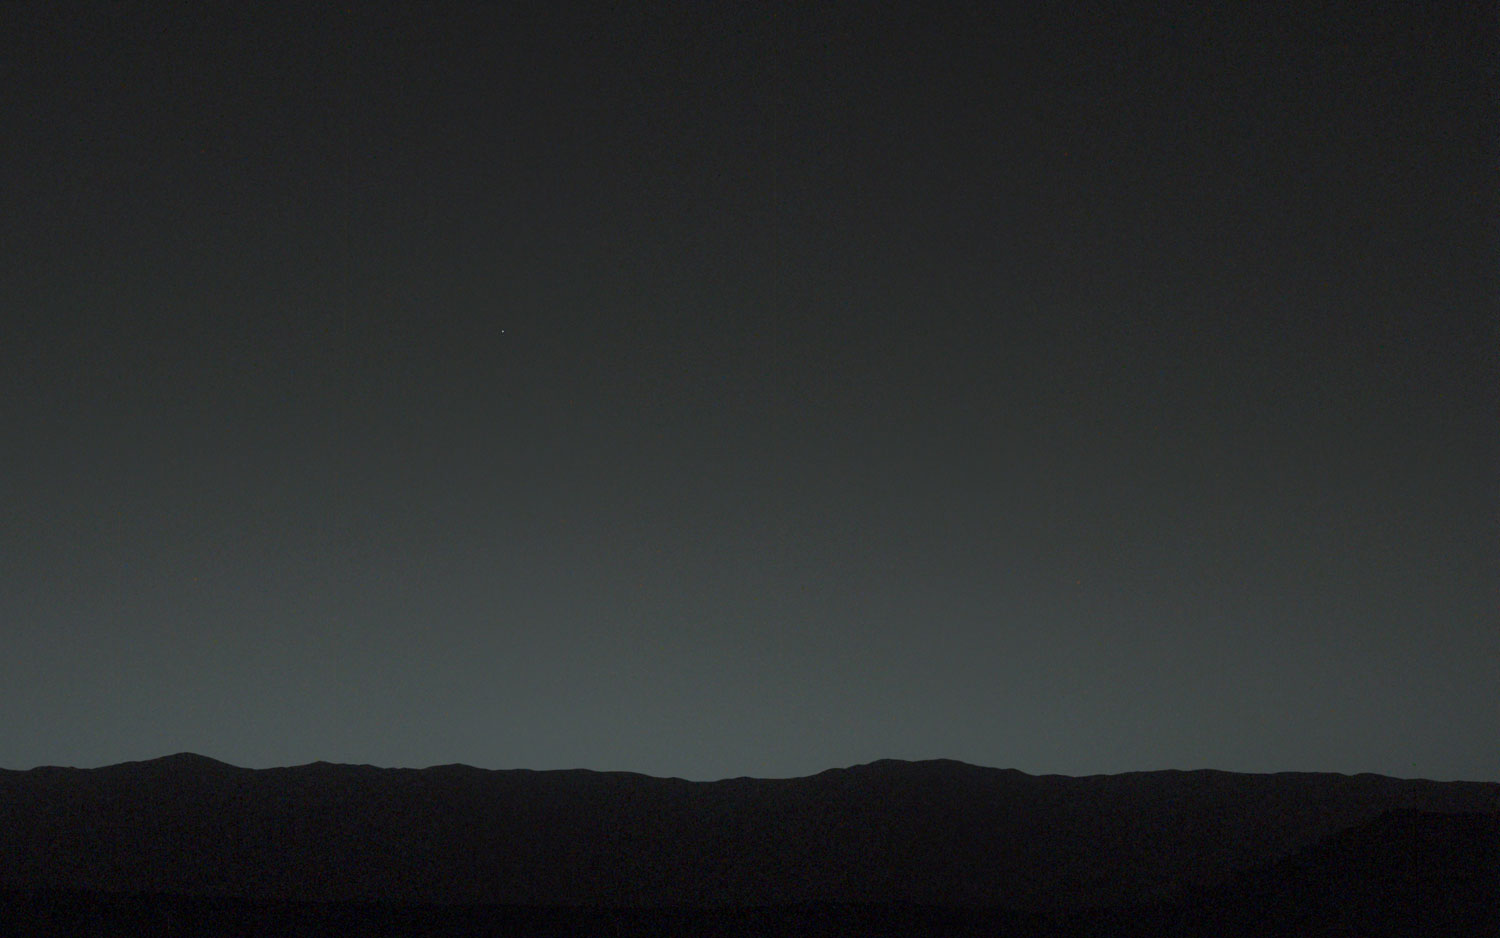 This view of the twilight sky and the Martian horizon taken by NASA's Curiosity Mars rover includes Earth as the brightest visible point of light, a little left of center in the image. The moon is just below it.  The picture was released on Feb. 6, 2014.